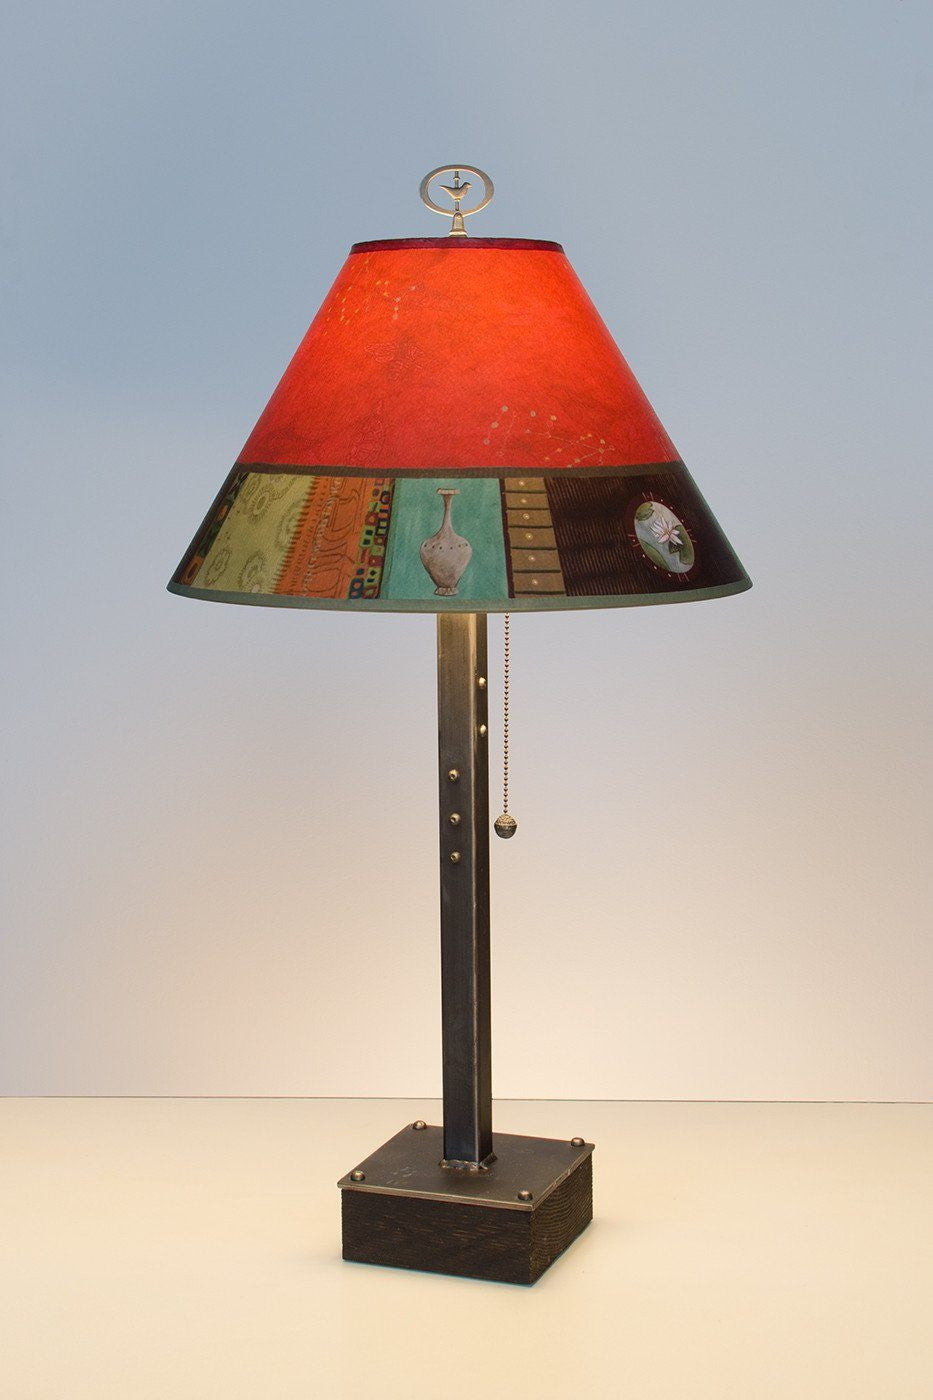 Steel Table Lamp on Wood with Medium Conical Shade in Red Match - Lit